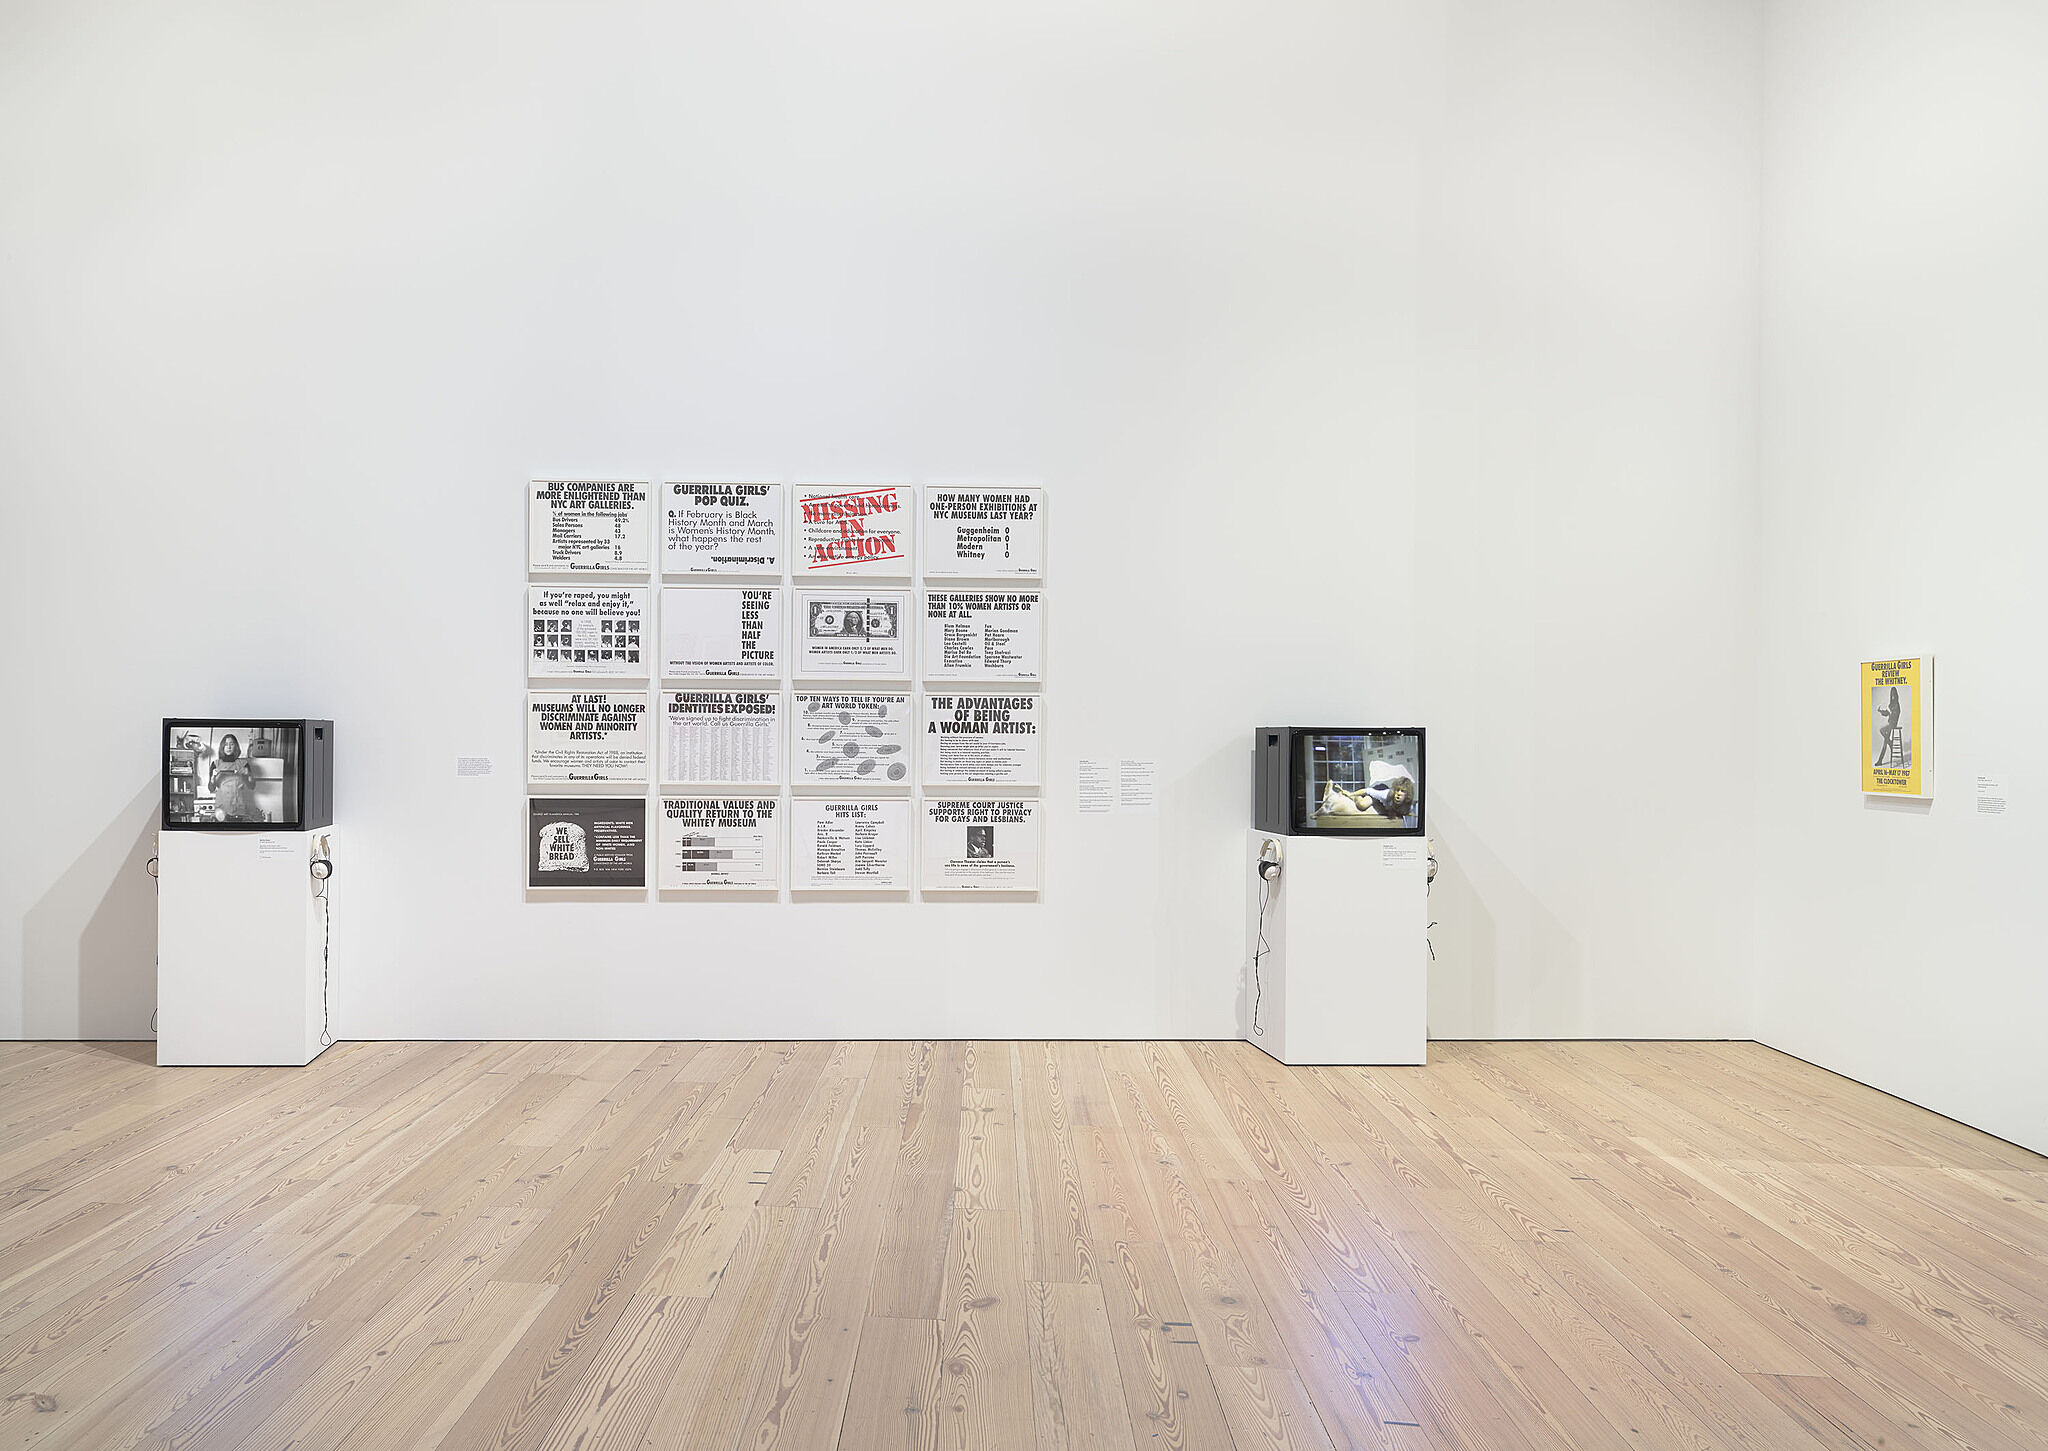 Installation view of An Incomplete History of Protest: Selections from the Whitney’s Collection, 1940–2017 